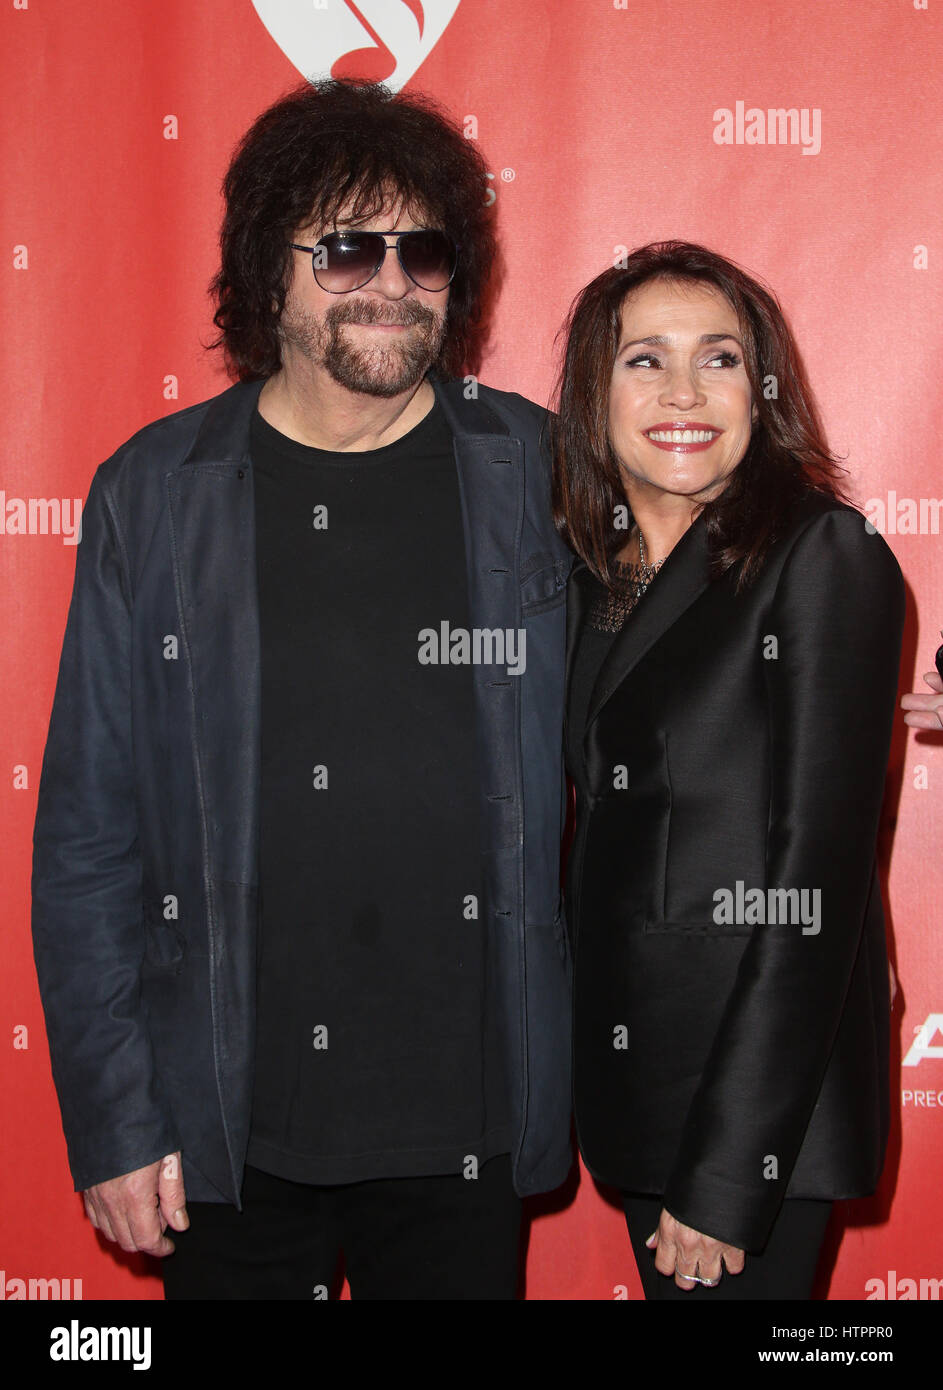 59th GRAMMY Awards - MusiCares Person of the Year Honoring Tom Petty - Arrivals  Featuring: Jeff Lynne, Sani Kapelson Lynne Where: Los Angeles, California, United States When: 10 Feb 2017 Stock Photo